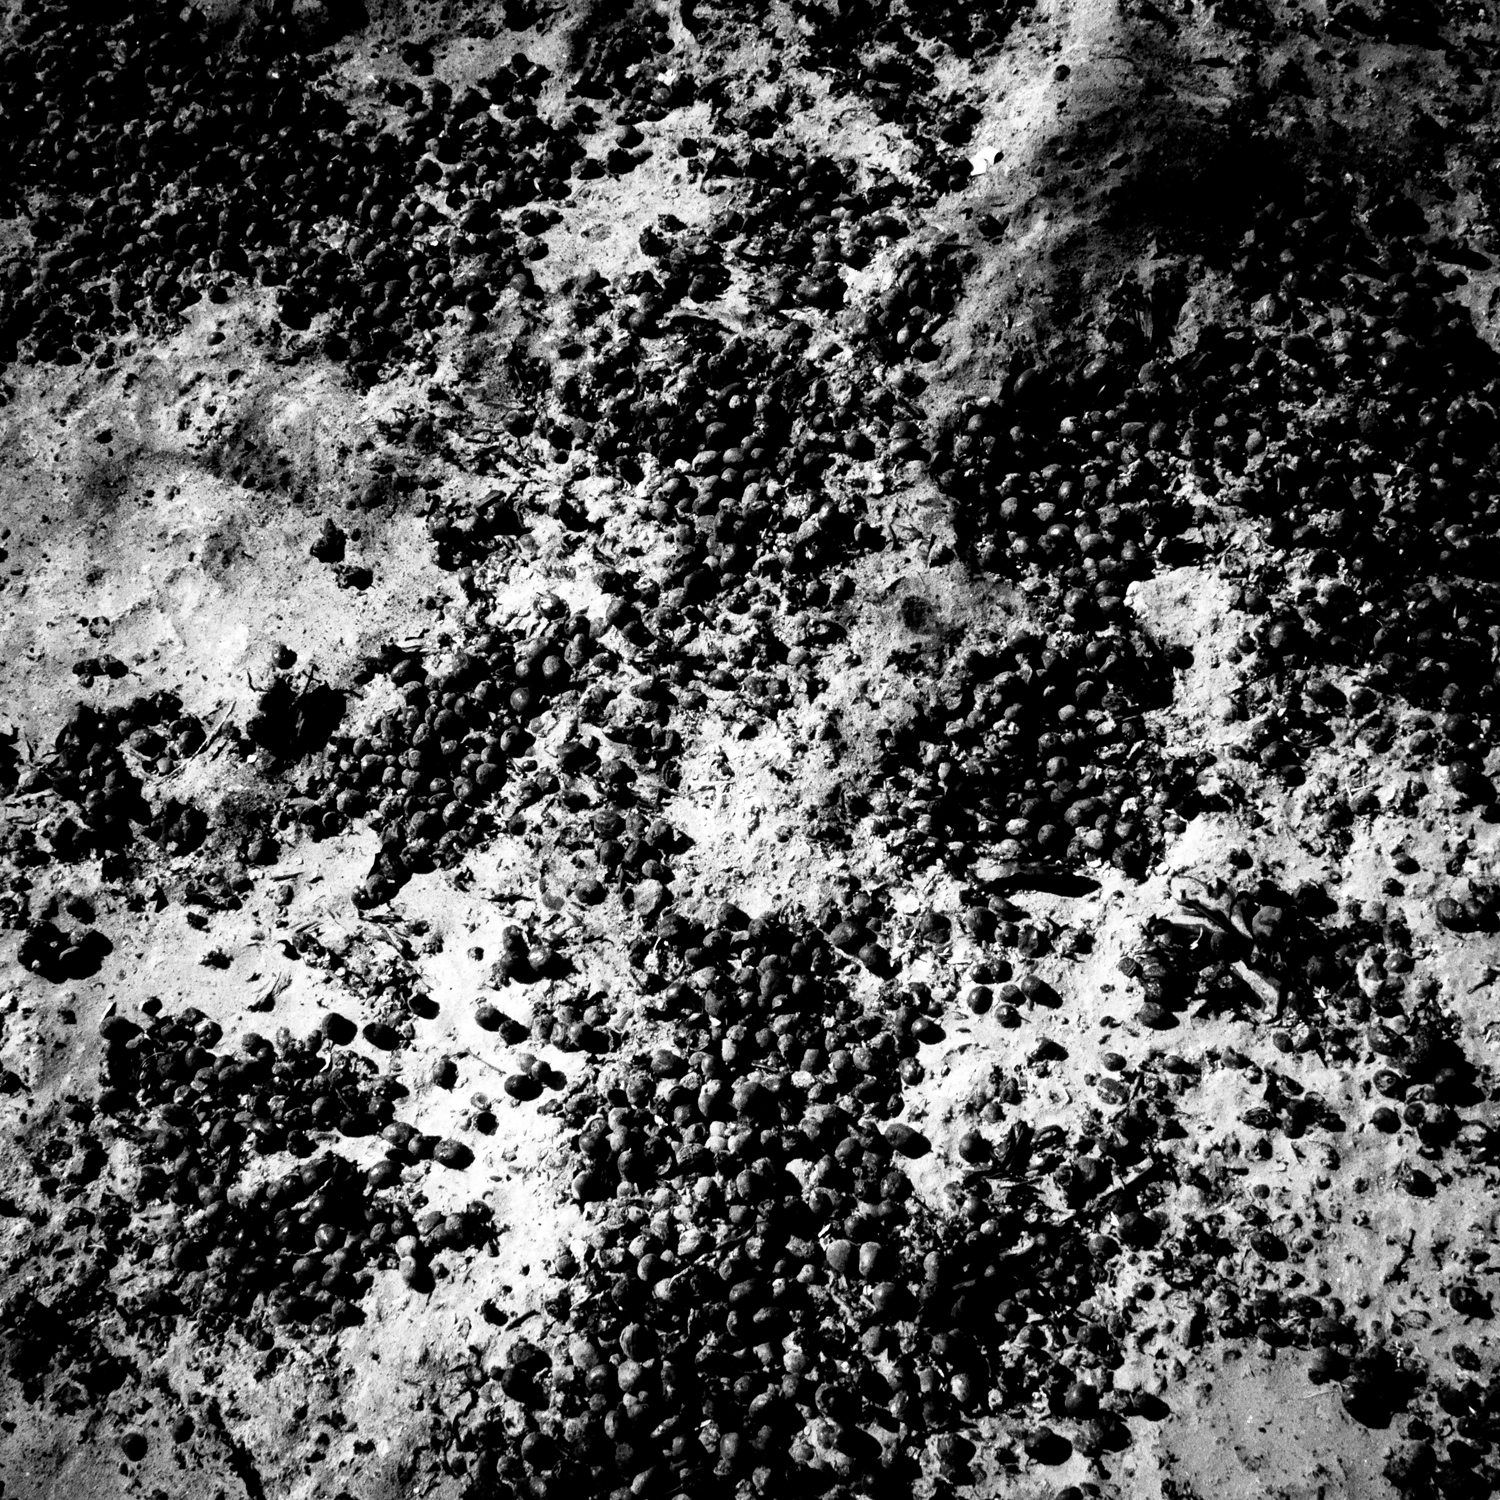 Spilled grapes. Caruthers, CA. 36°32’13”N 119°50’3”W #geographyofpoverty
                              
                              Caruthers is an unincorporated community in Fresno County, California, United States. The population was 2,497 at the 2010 census. Residents have a per capita income of $13,507 and 19% live below the poverty level.